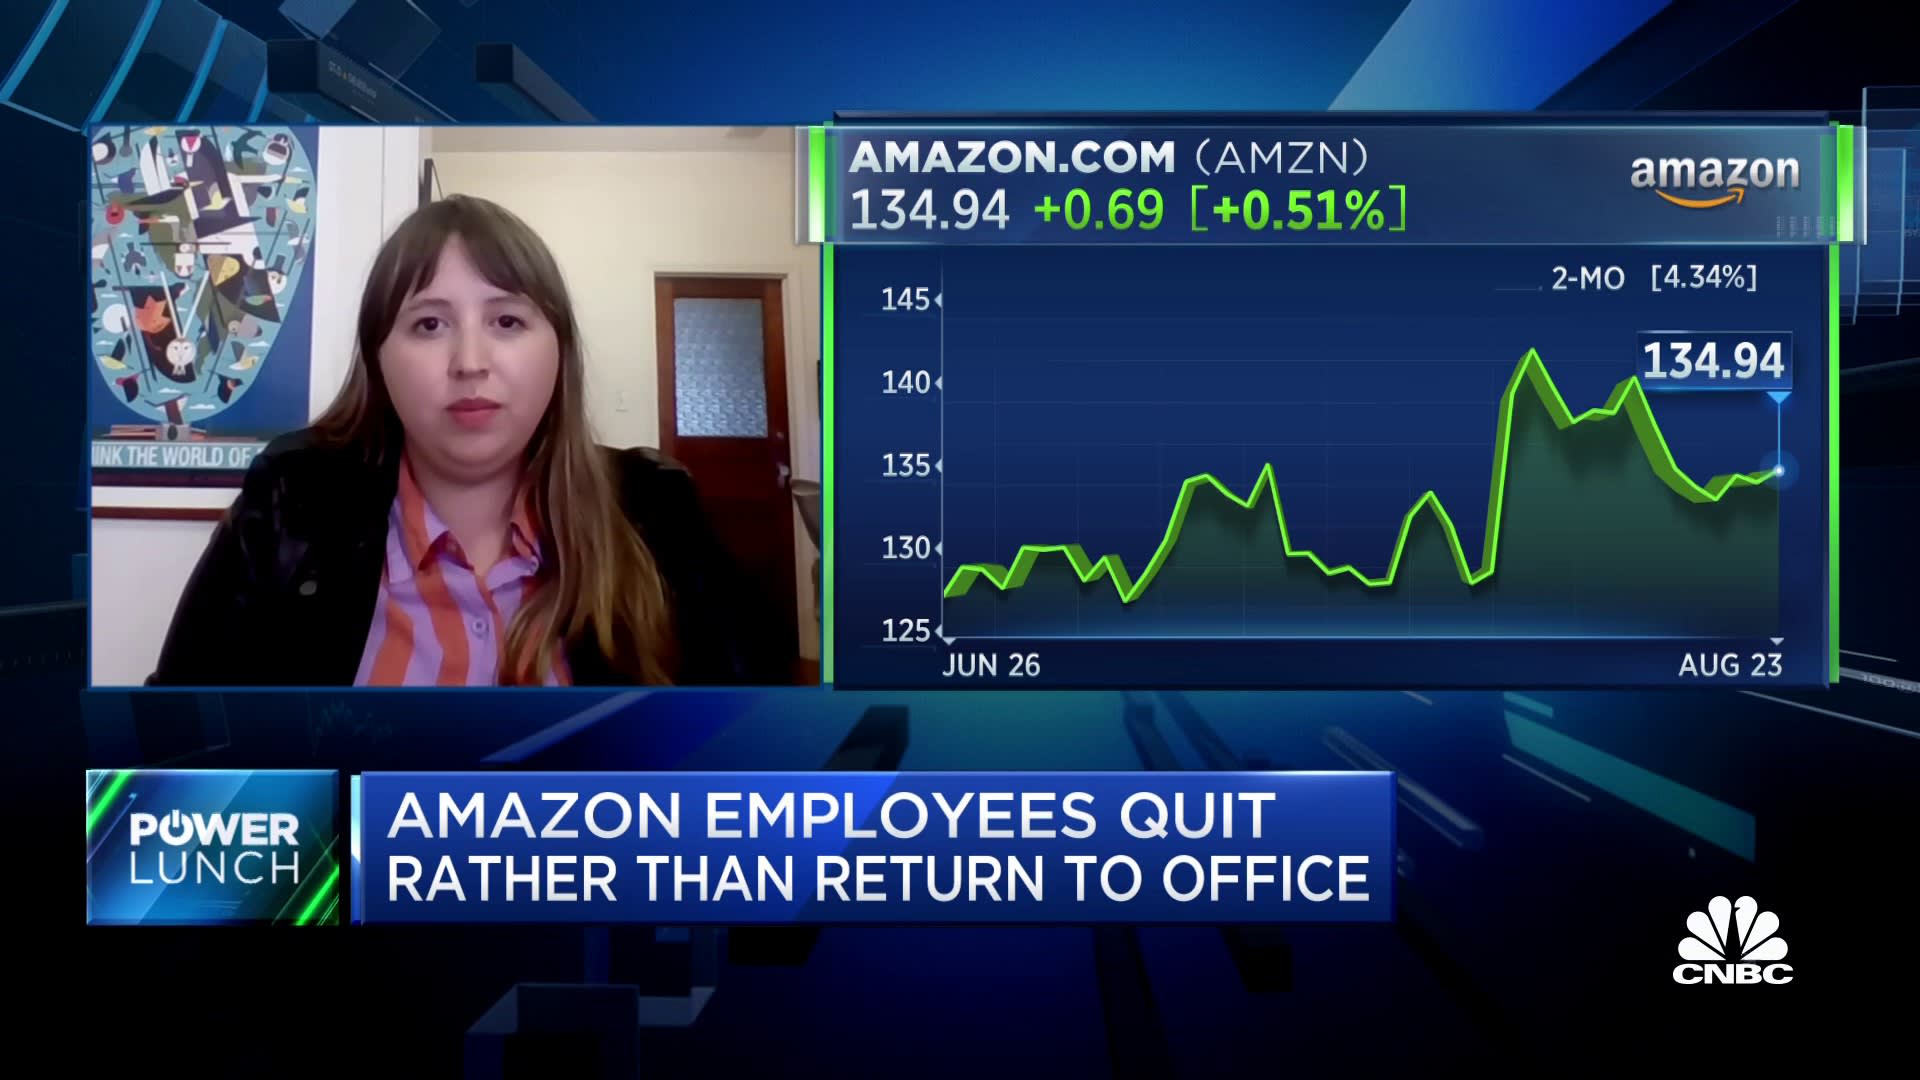 Amazon employees are quitting instead of relocating to 'hubs'